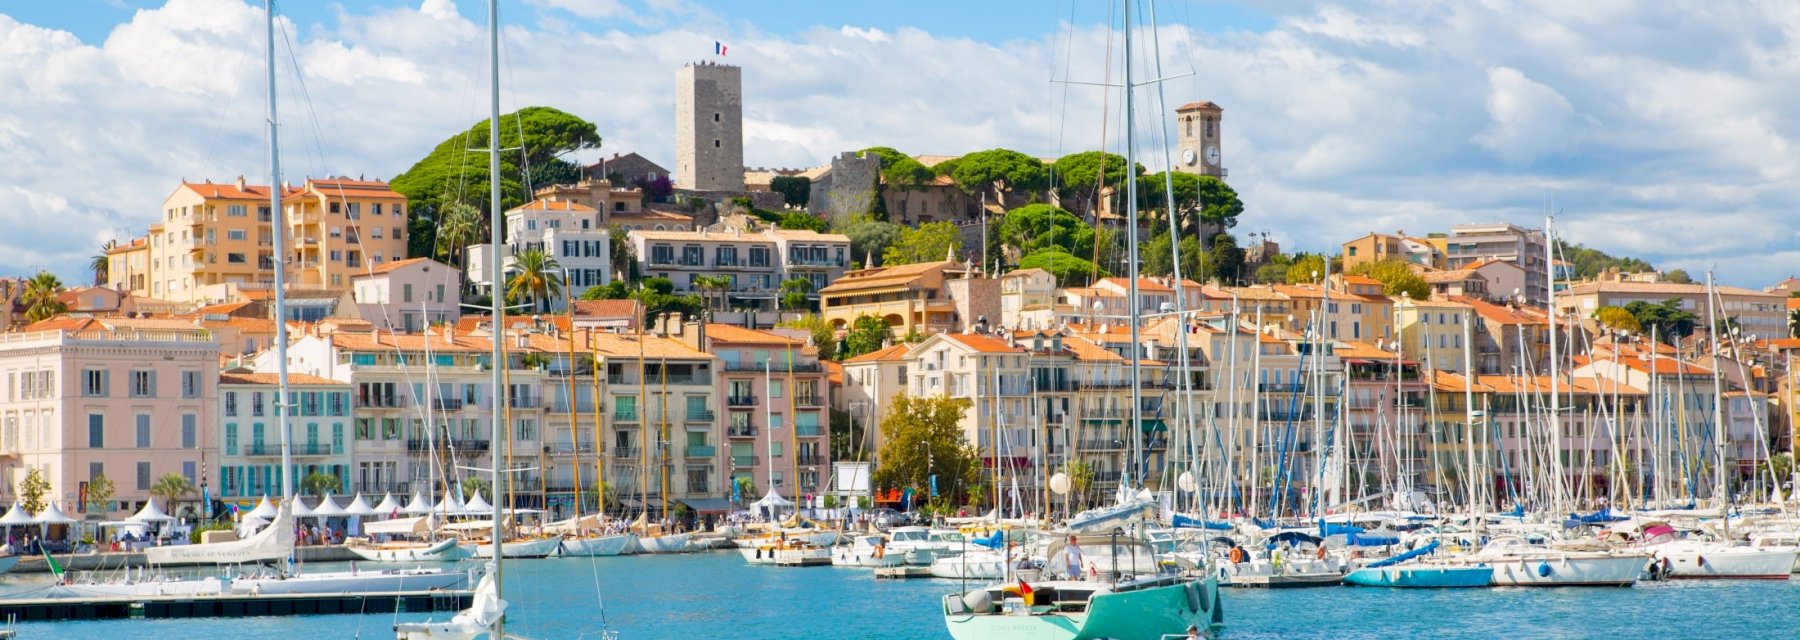 Our travel guide to Cannes: Best things to do during the film festival